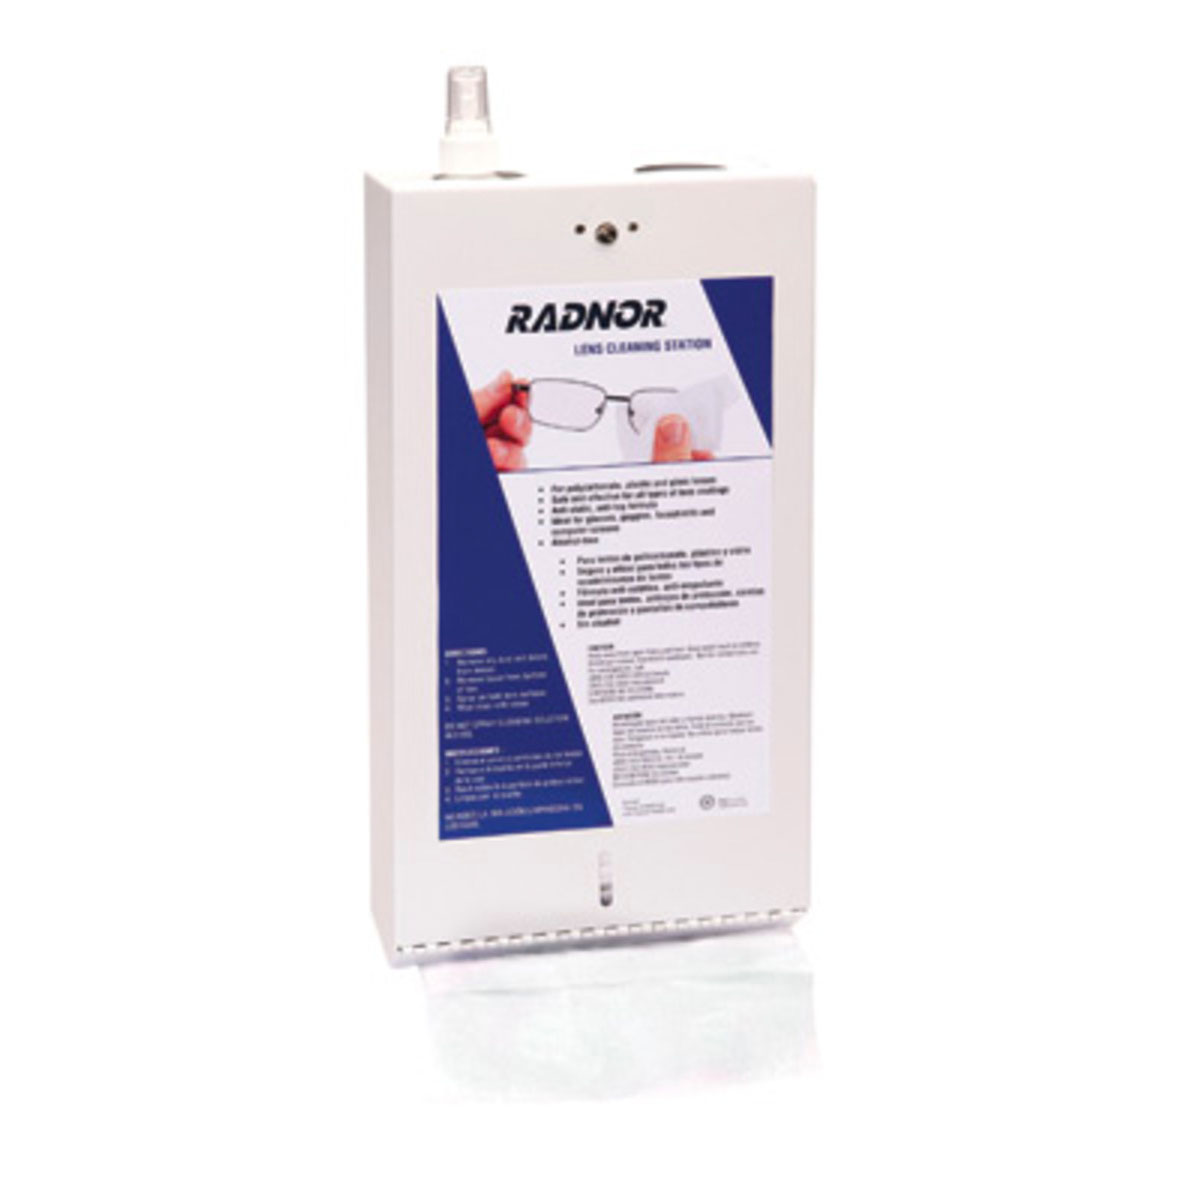  RADNOR® Metal Lens Cleaning Station Protective Eyewear